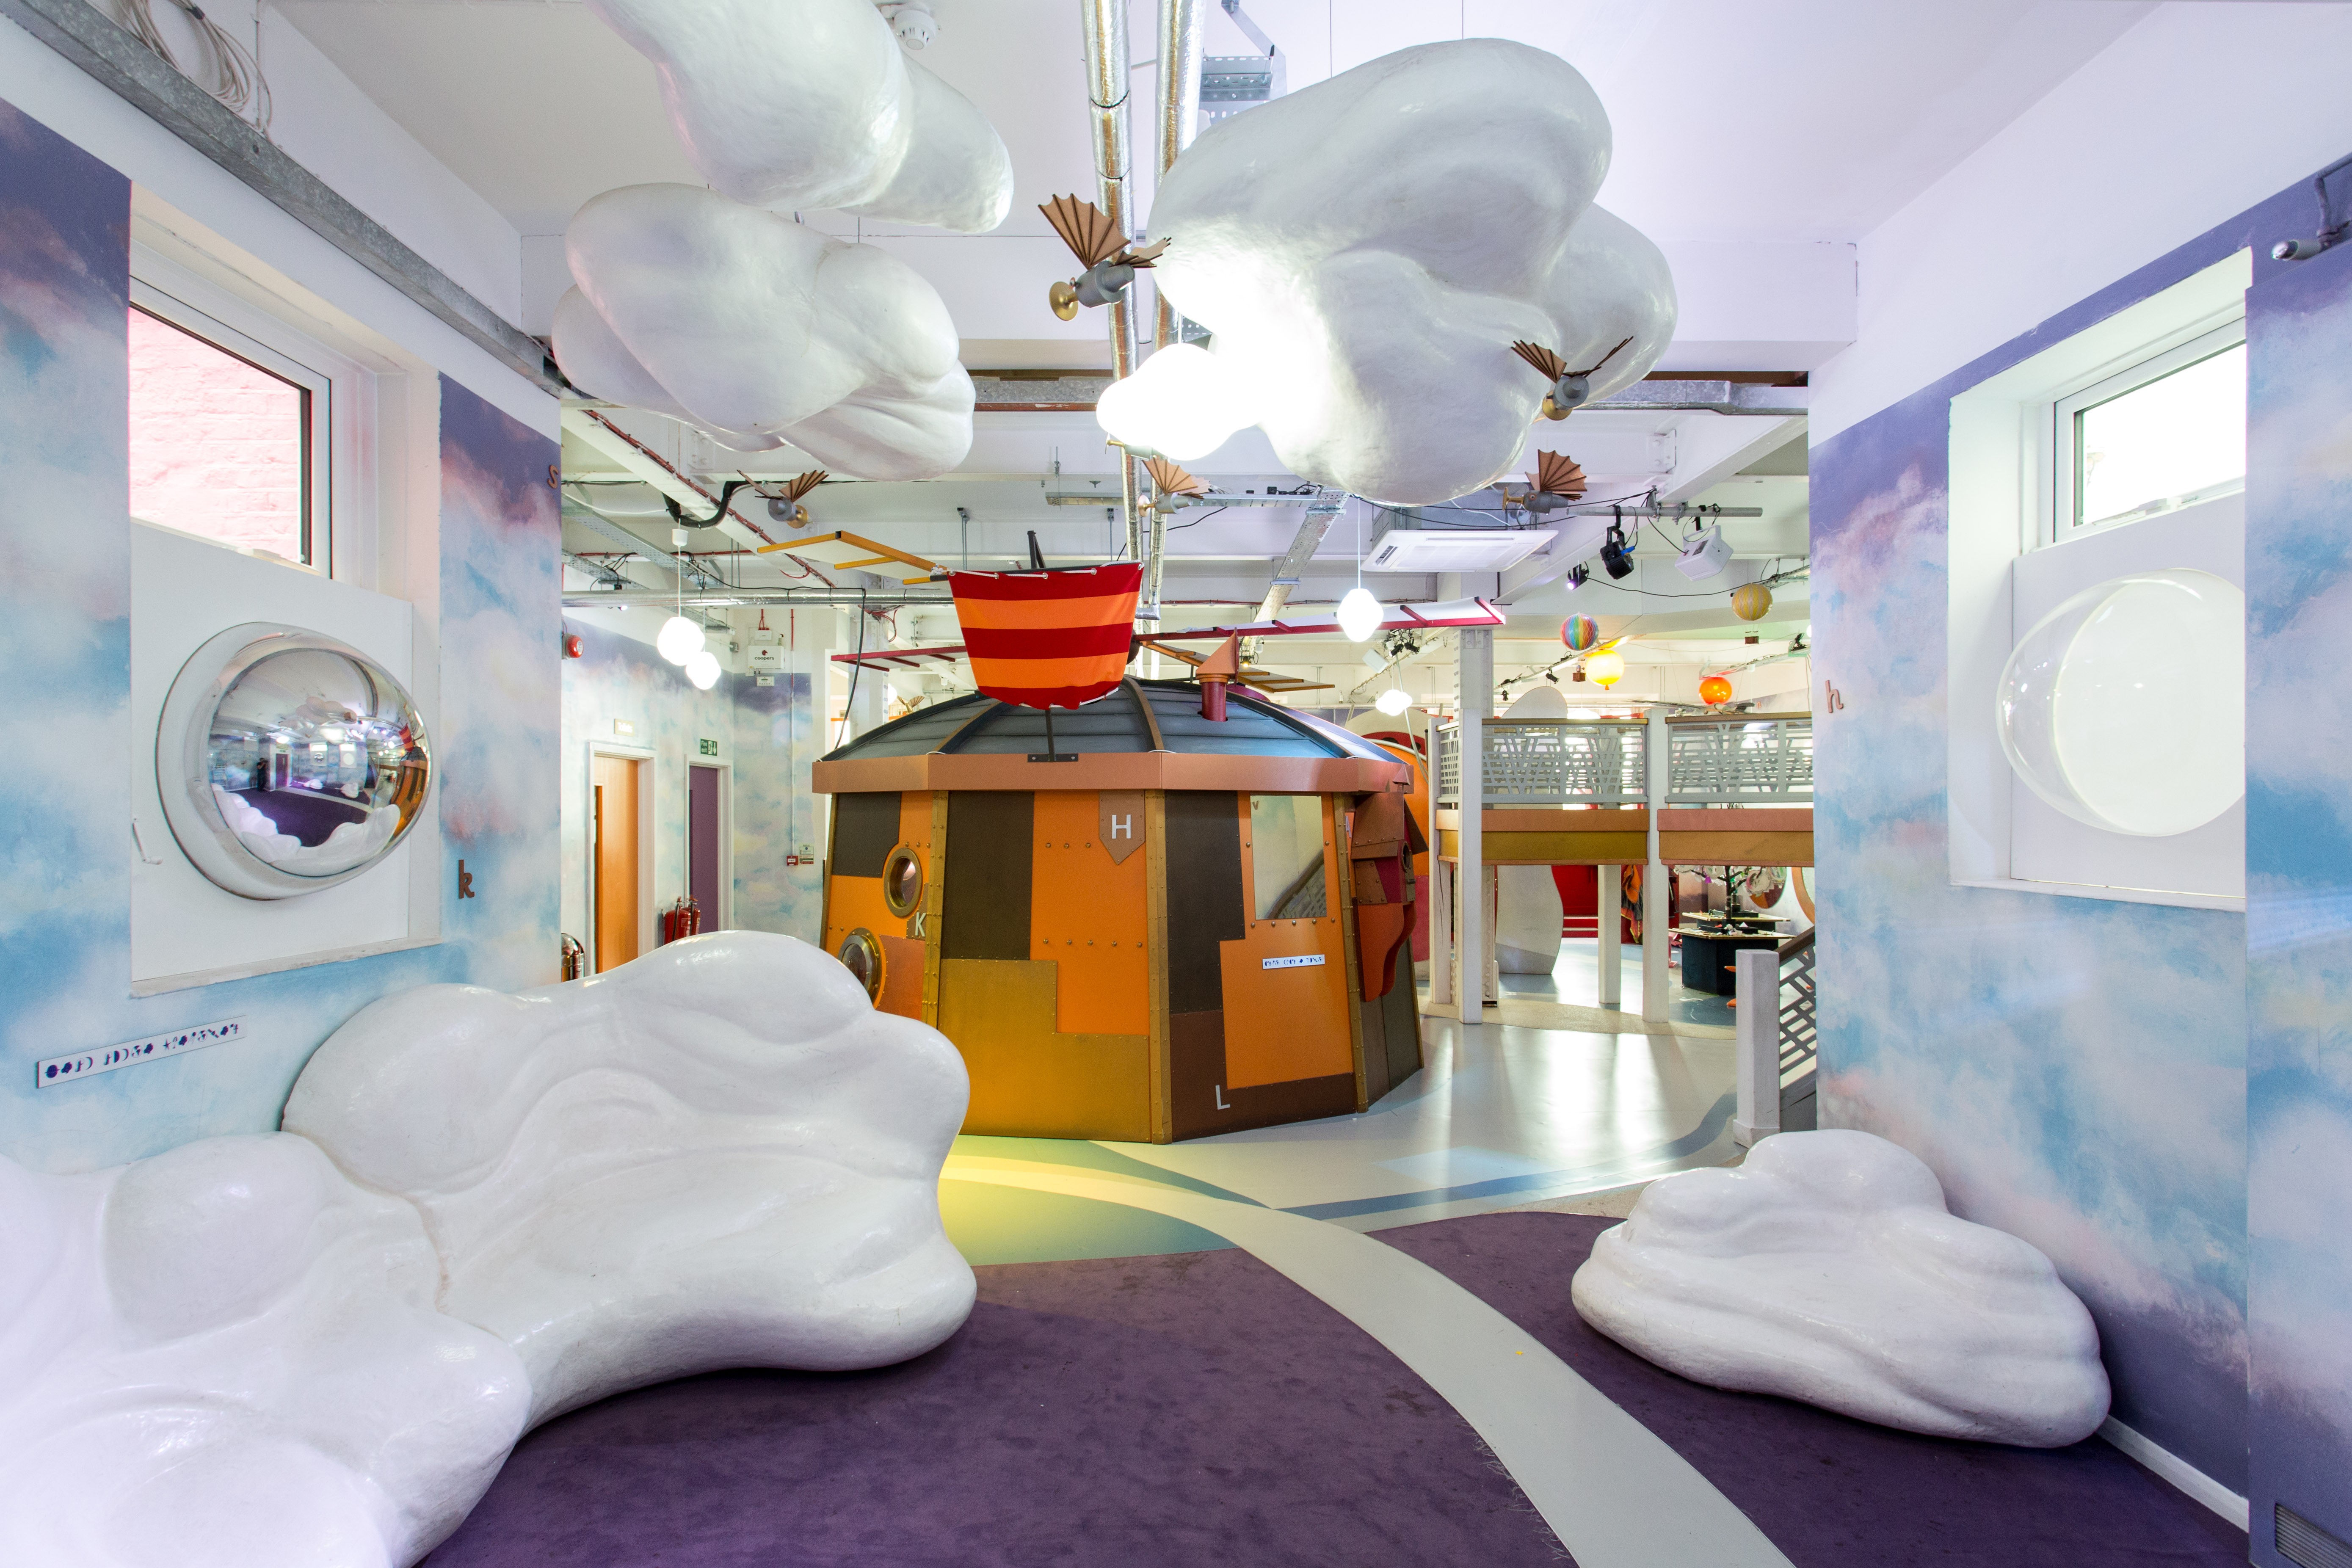 Explore both floors of our fantastic Story World